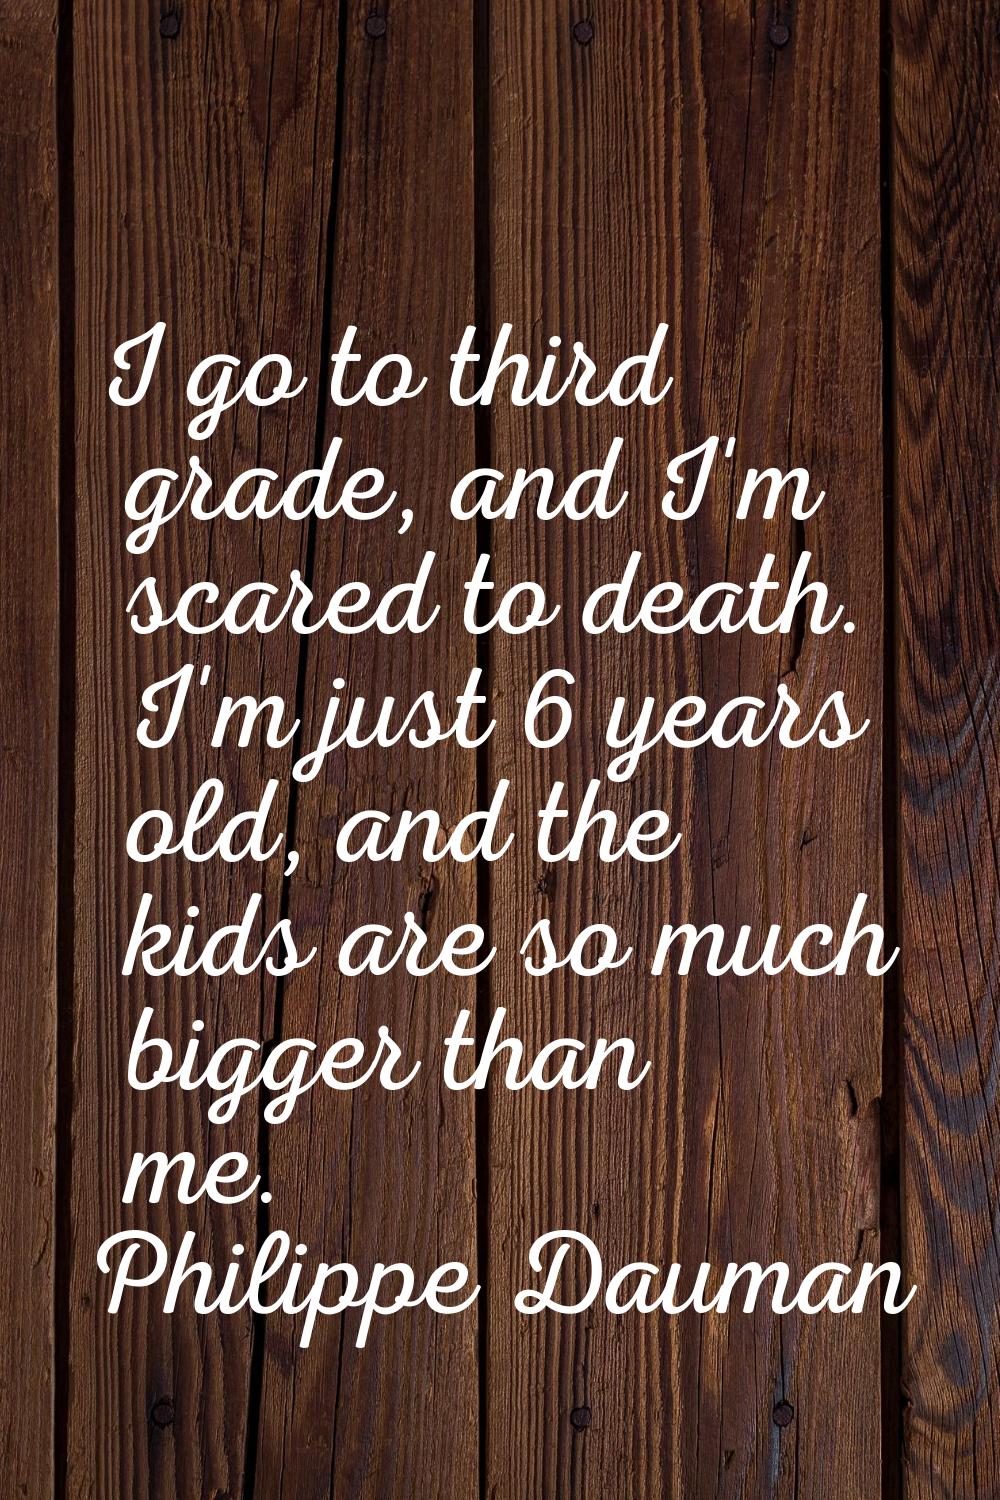 I go to third grade, and I'm scared to death. I'm just 6 years old, and the kids are so much bigger